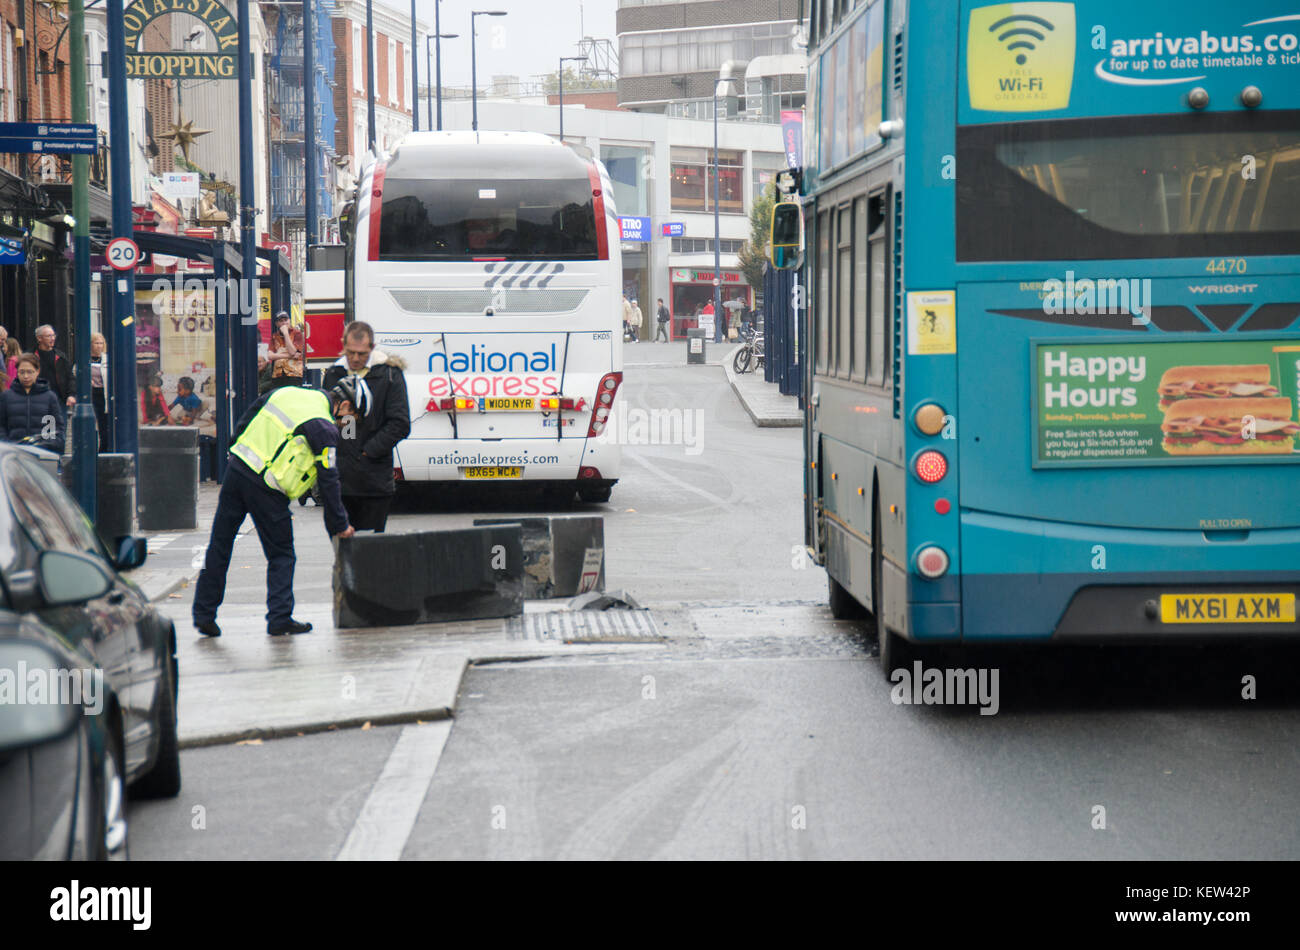 Maidstone, Kent. 23rd Oct, 2017. A coach driver on the Victoria Station to Dover route only made it as far as the traffic bollards in central Maidstone - on his first day in the job. Two bollards used to reduce the High Street to a single lane were knocked over in the collision shortly after 1pm. The National Express coach was still waiting to be towed away nearly three hours later. Nobody was injured and passengers were transferred to taxis to continue their journey (the man in the photo is NOT the driver) Credit: PjrFoto/Alamy Live News Stock Photo